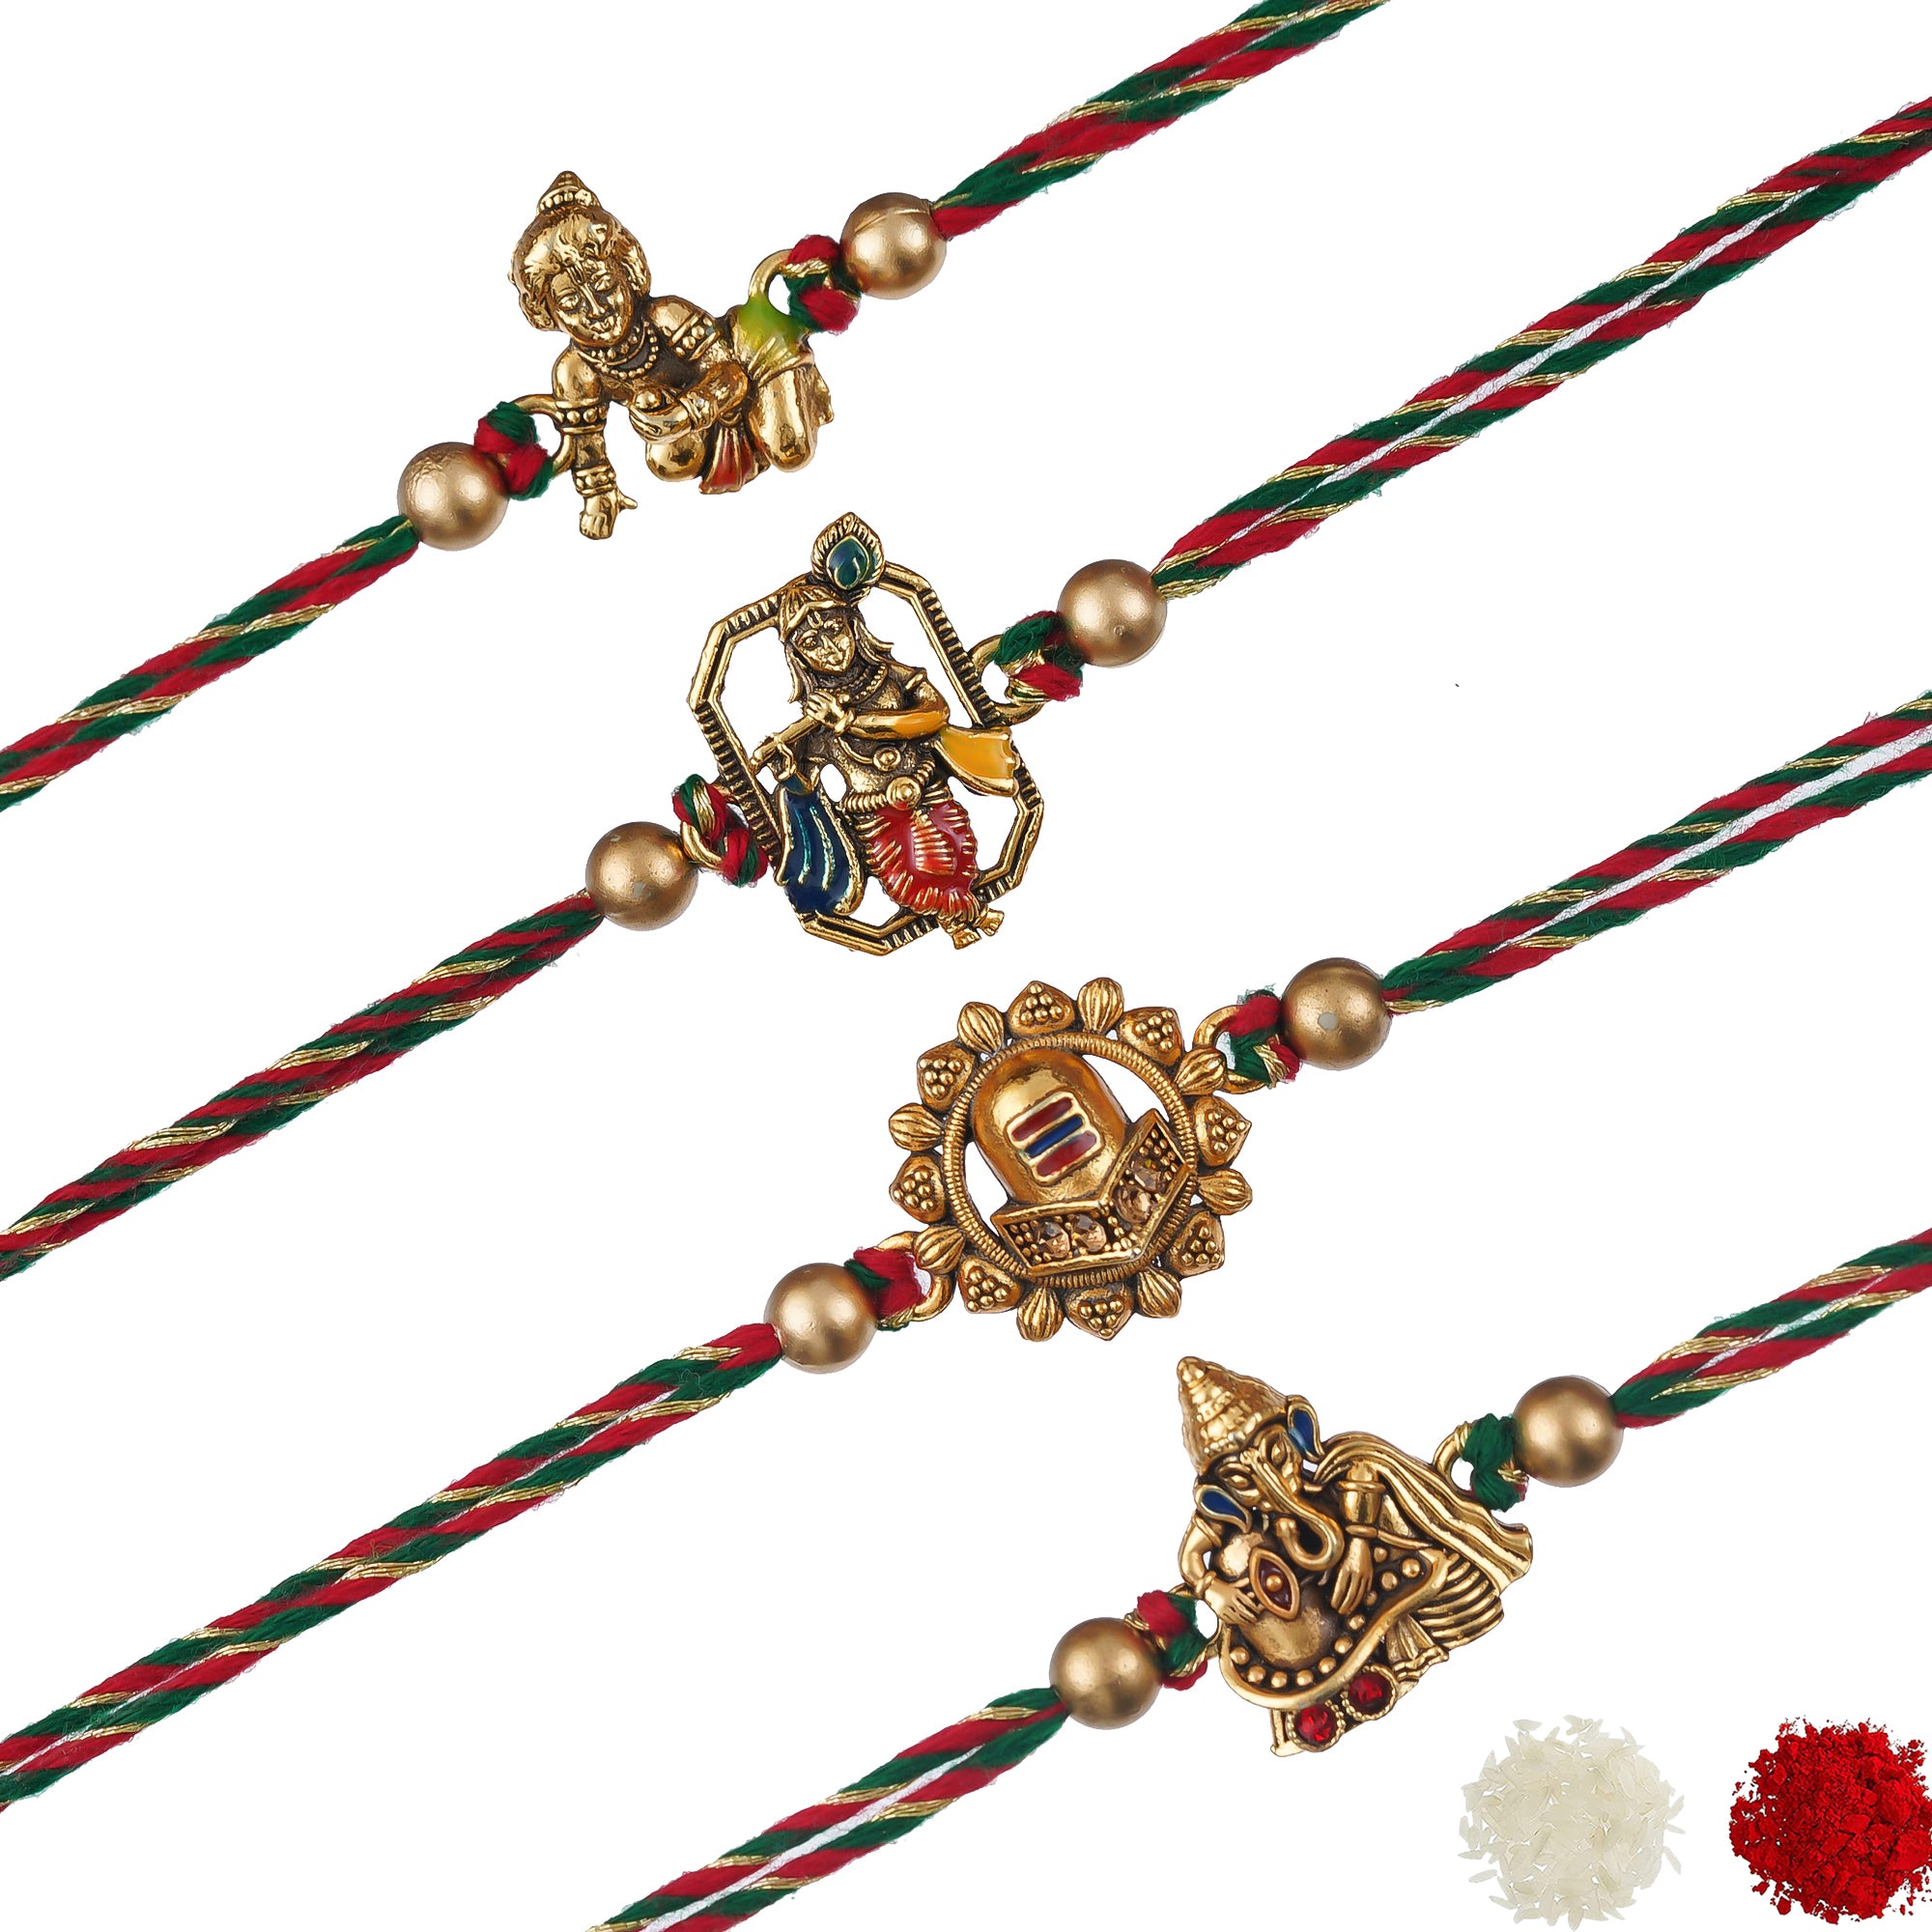 eCraftIndia Set of 4 Golden Laddu Gopal, Lord Krishna Playing Flute, Lord Ganesha, and Shivling Religious Rakhis with Green Red Threads, and Roli Chawal Pack 2